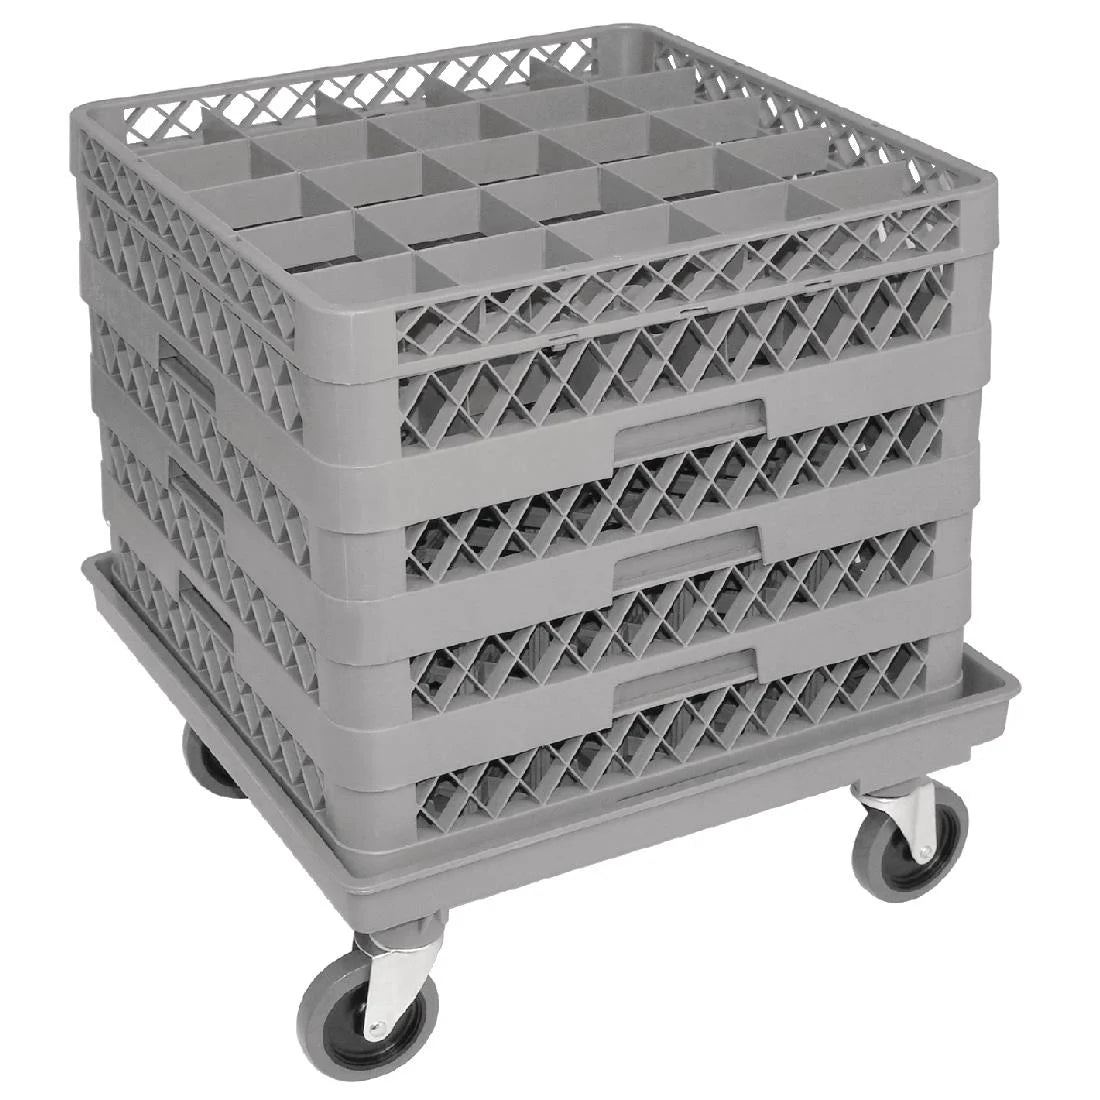 Dishwasher Rack Dolly.Product Ref:00694.Model:CB006 . 🚚 1-3 Days Delivery